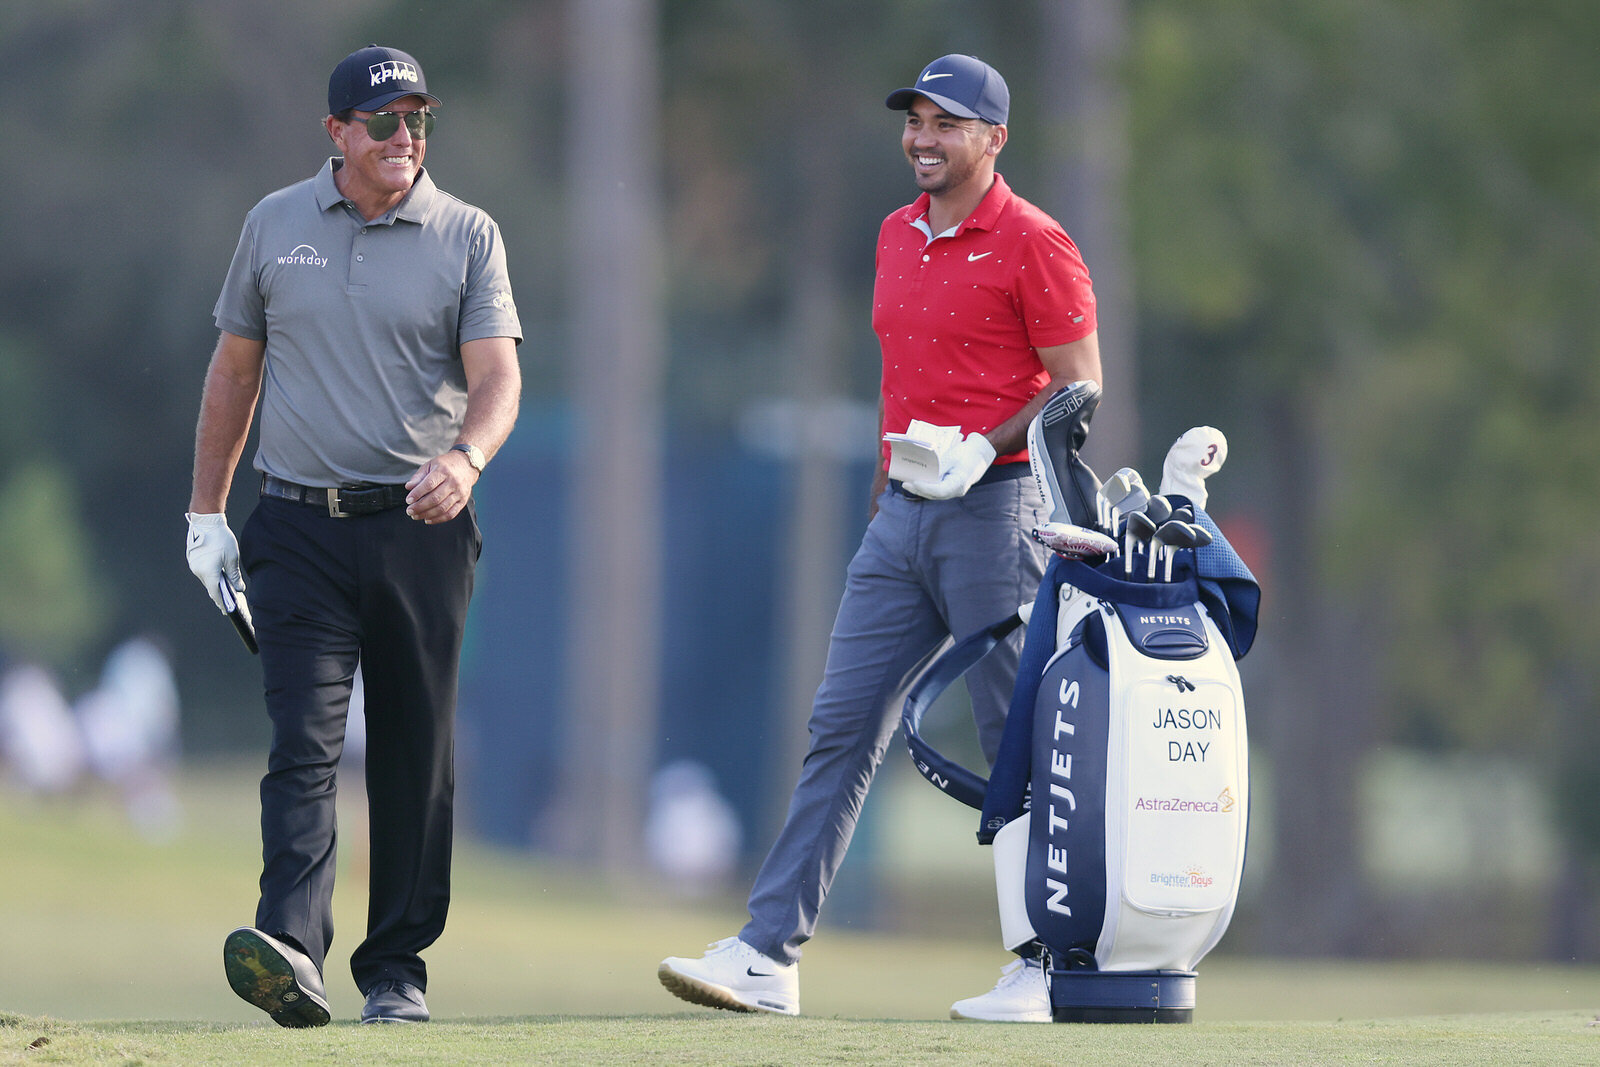  HOUSTON, TEXAS - NOVEMBER 05: Phil Mickelson of the United States and Jason Day of Australia laugh on the third hole during the first round of the Vivint Houston Open at Memorial Park Golf Course on November 05, 2020 in Houston, Texas. (Photo by Car